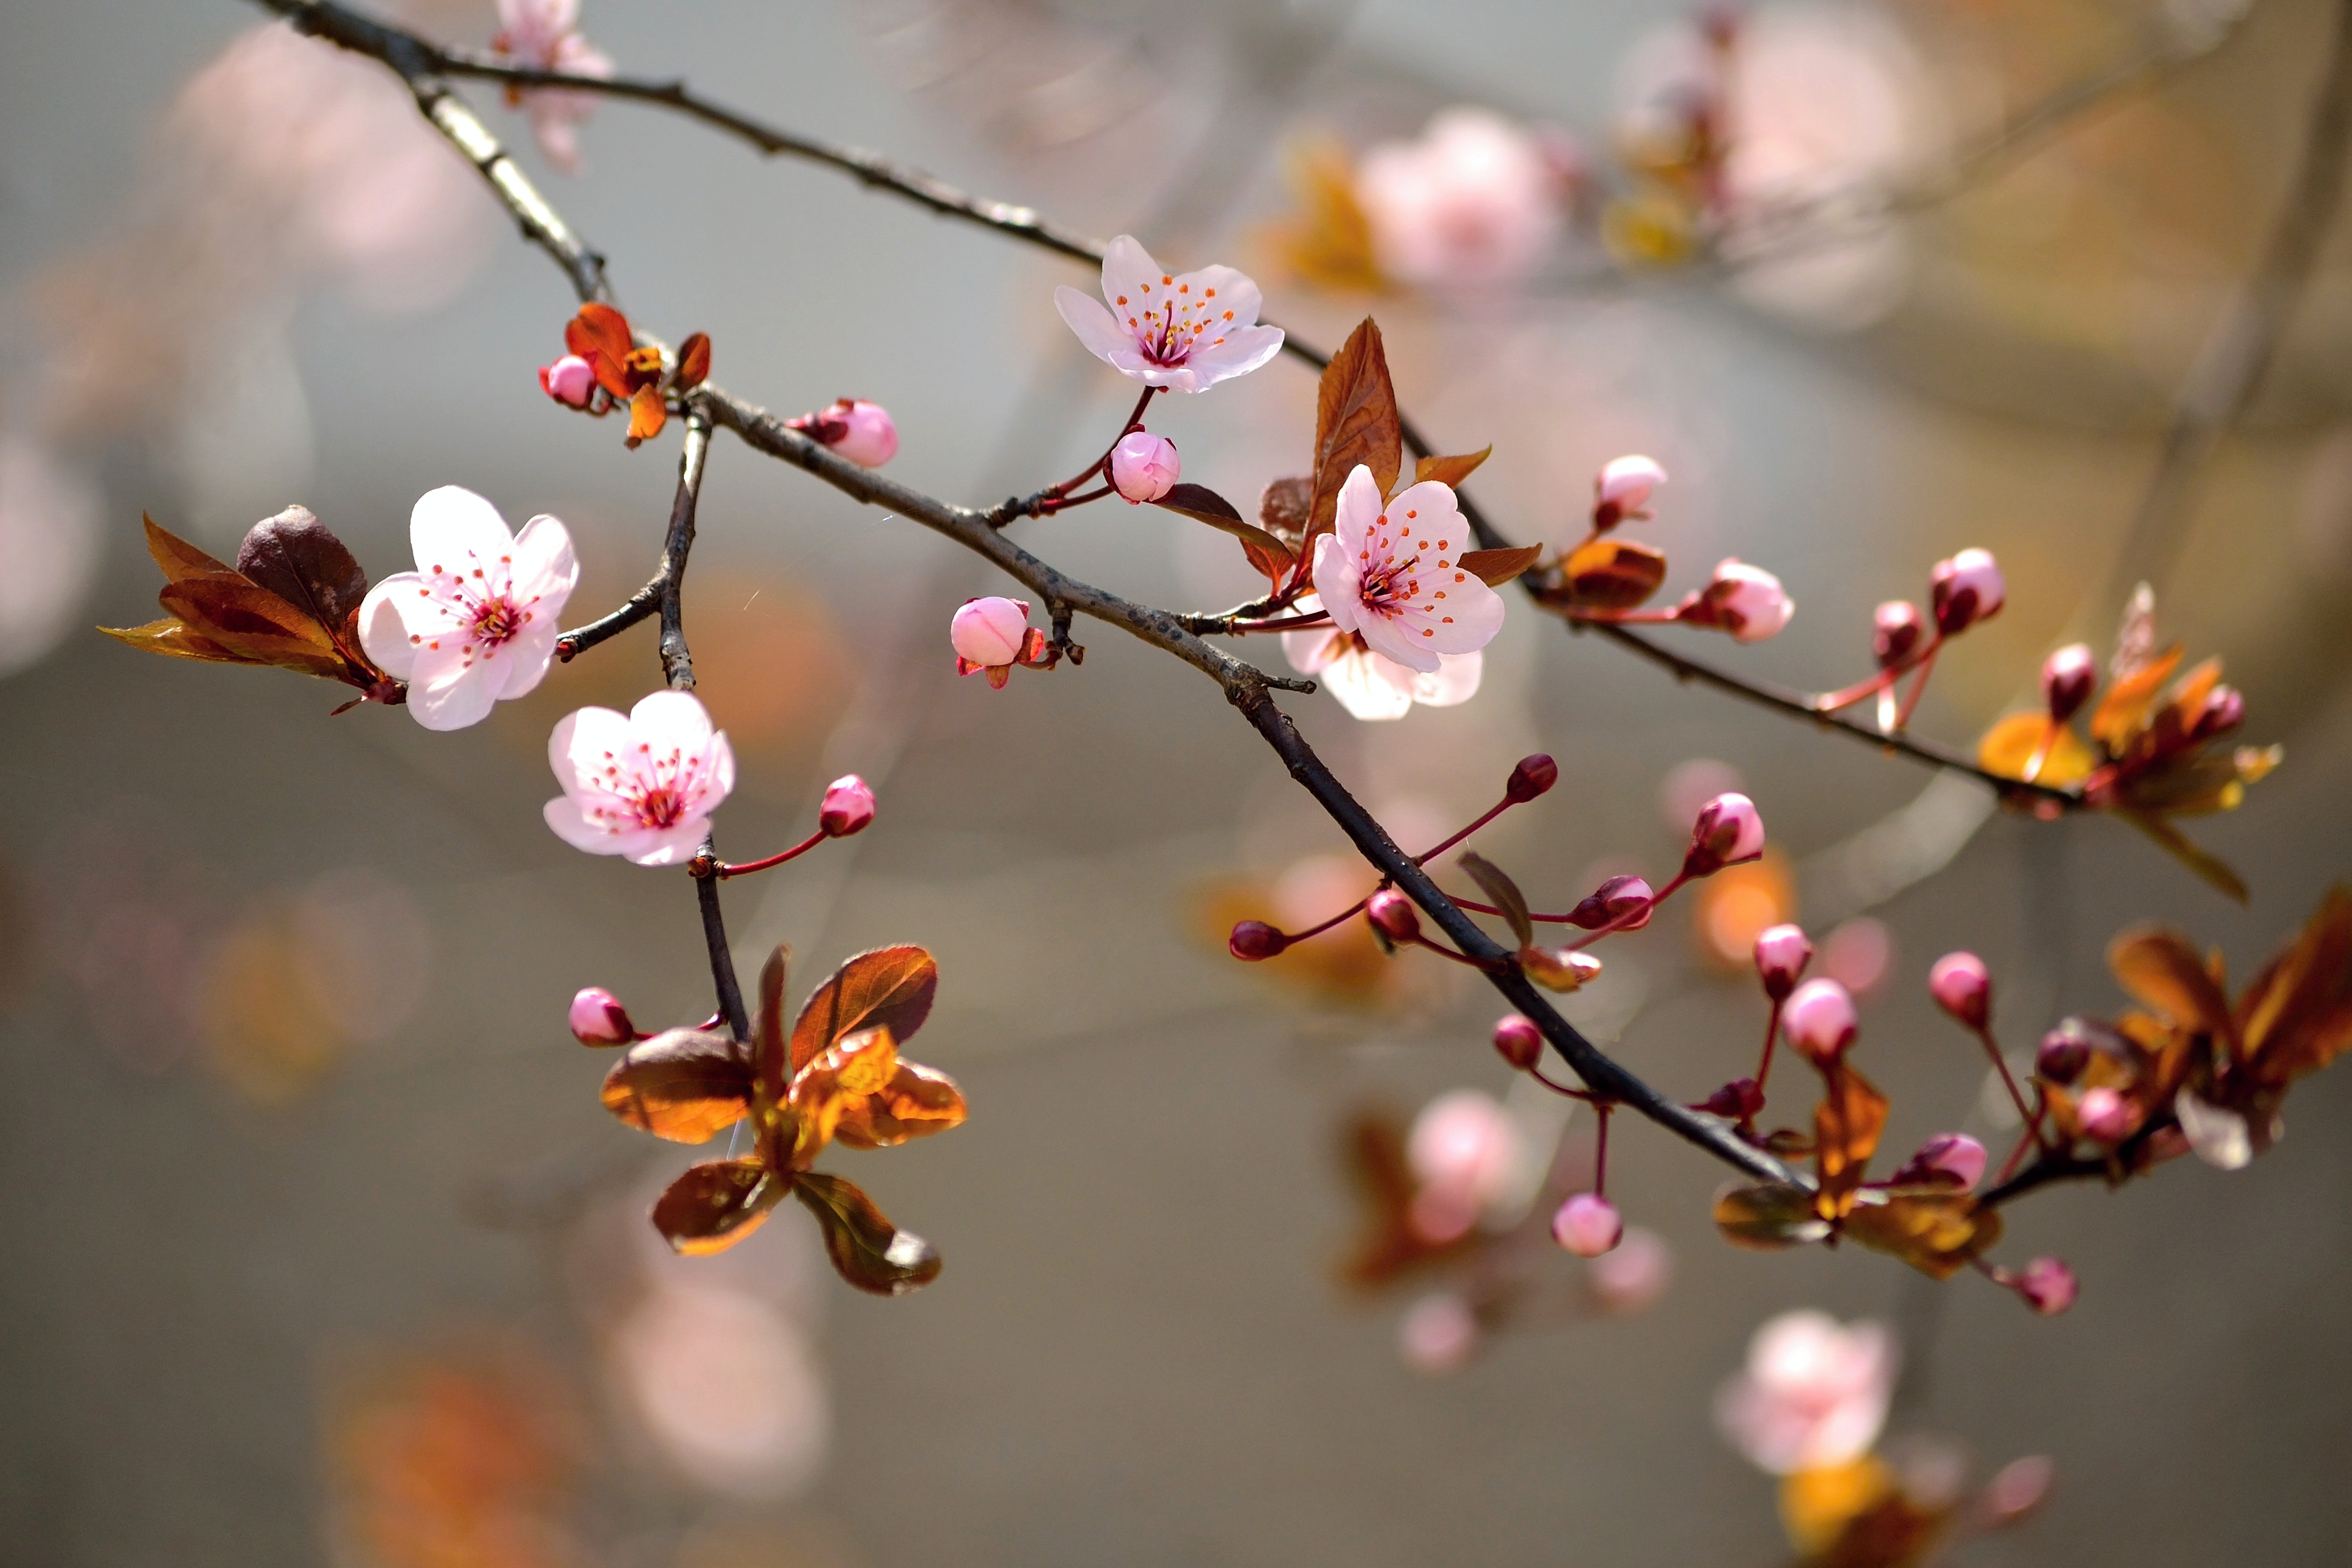 General 9216x6144 macro blossoms branch spring pink flowers nature flowers plants twigs